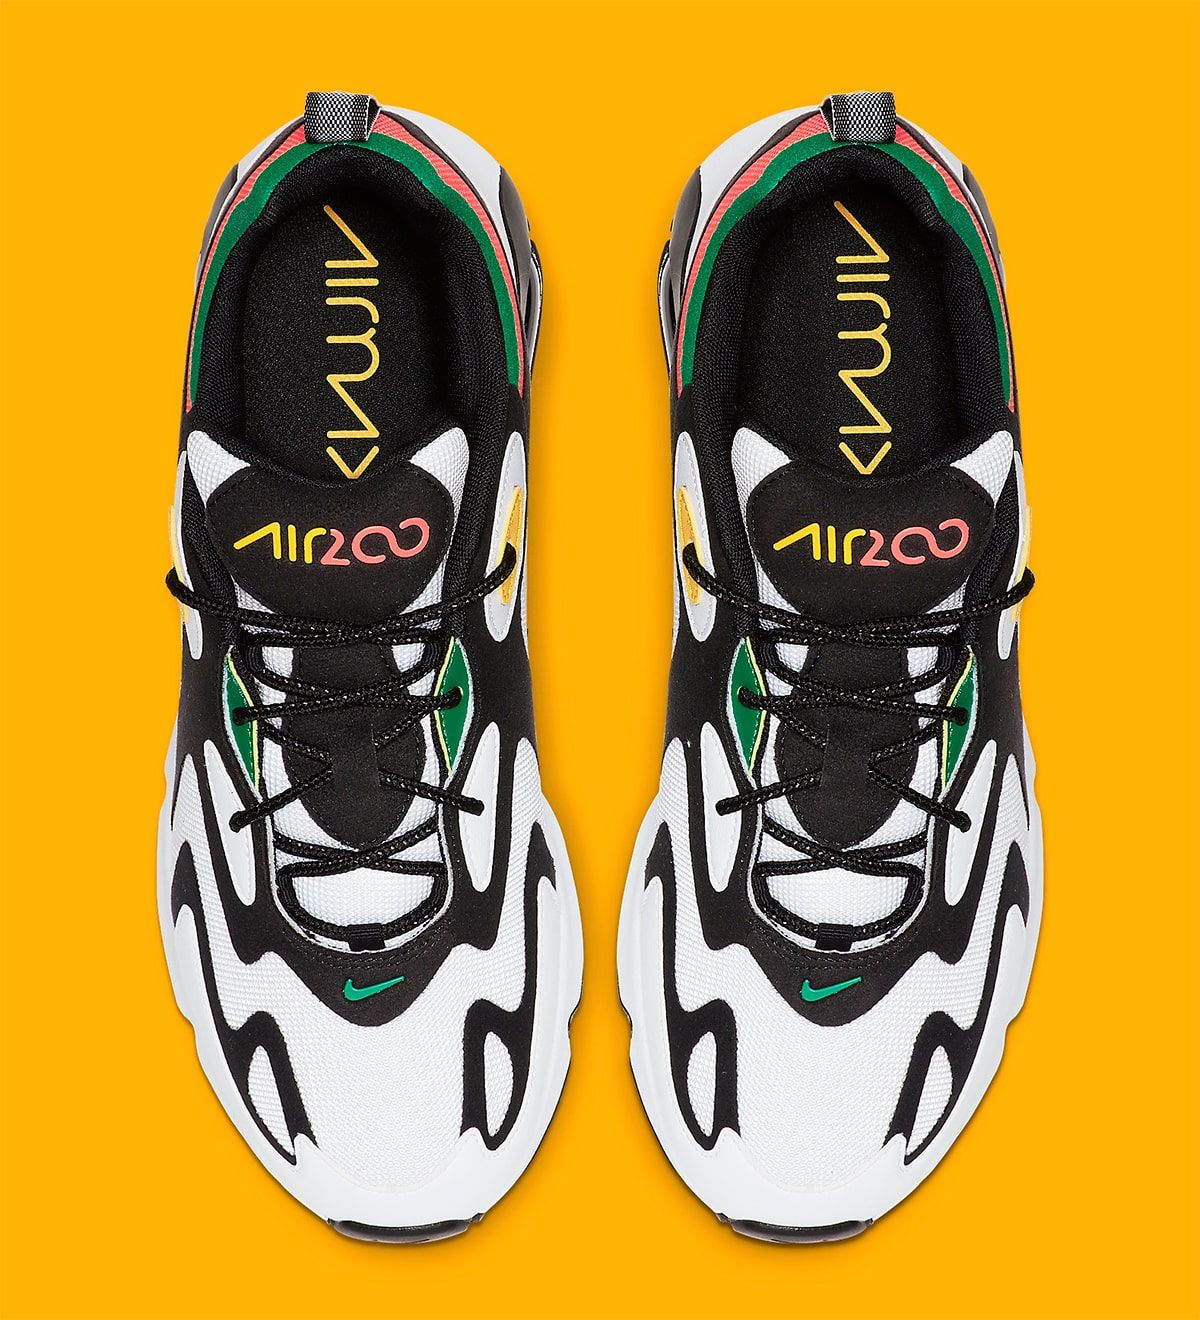 Drama Evaluable Buzo Gucci” Nike Air Max 200 Release This Friday! | House of Heat°